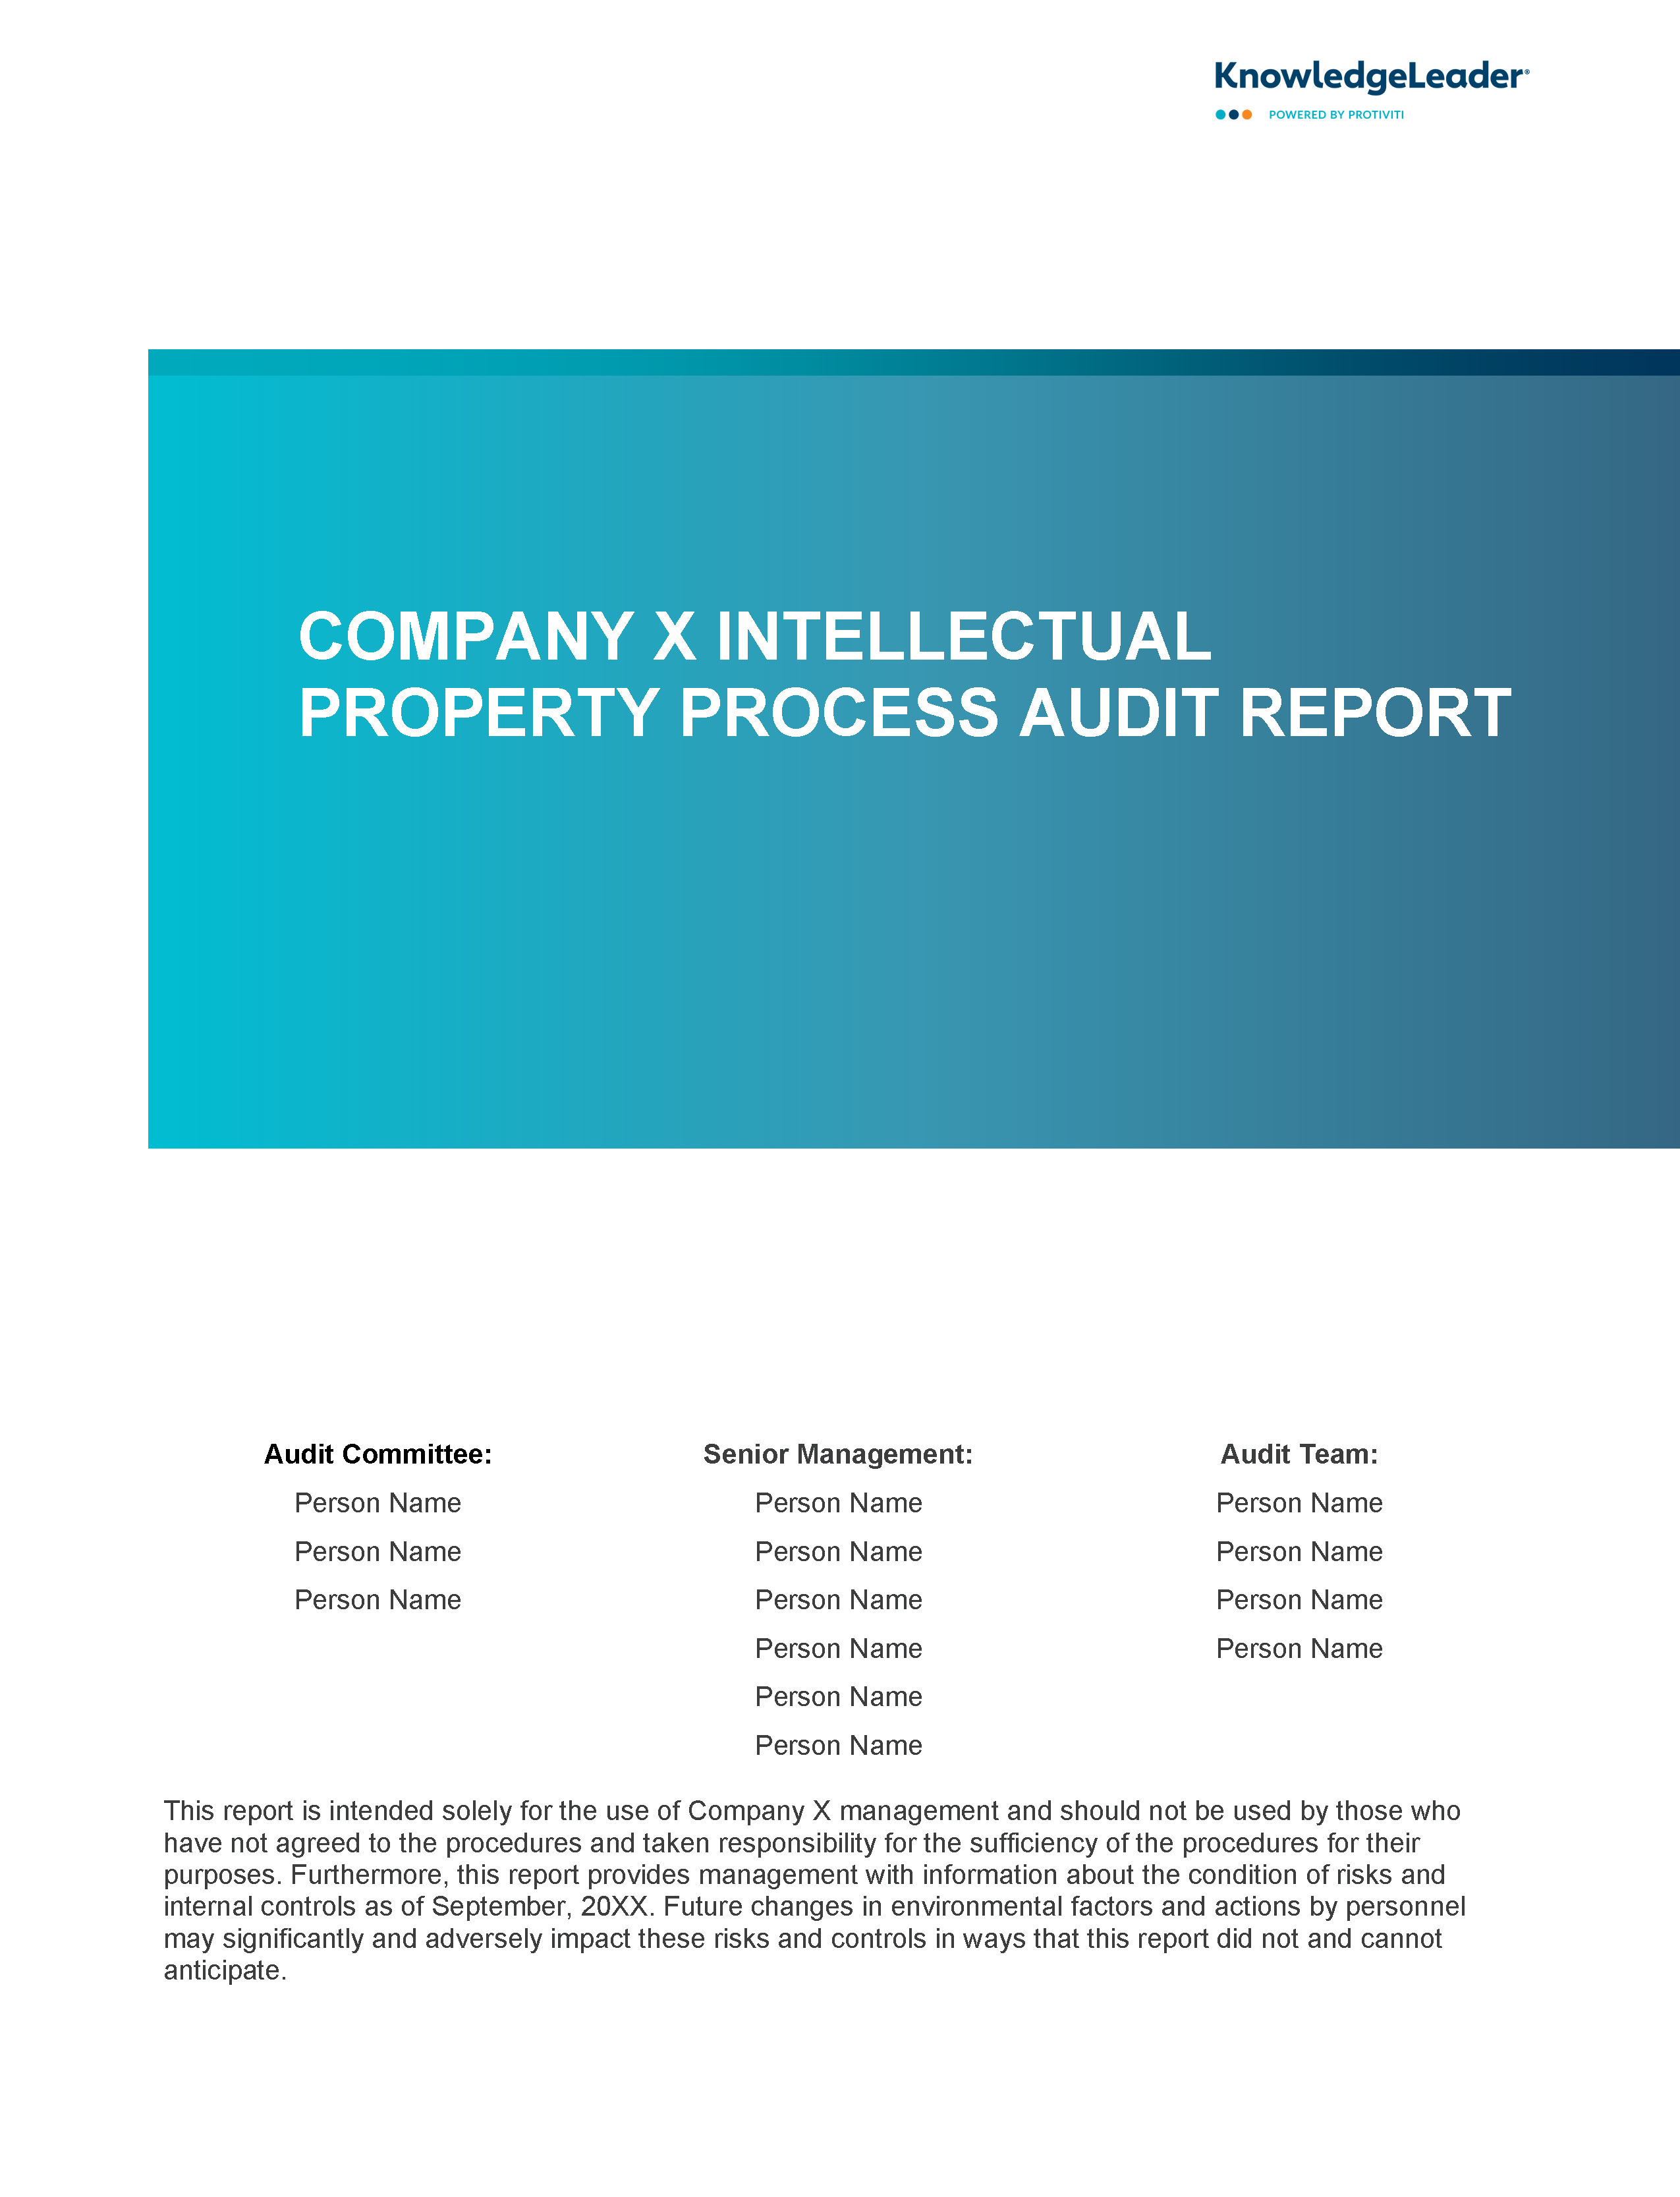 Screenshot of the first page of Intellectual Property Process Audit Report